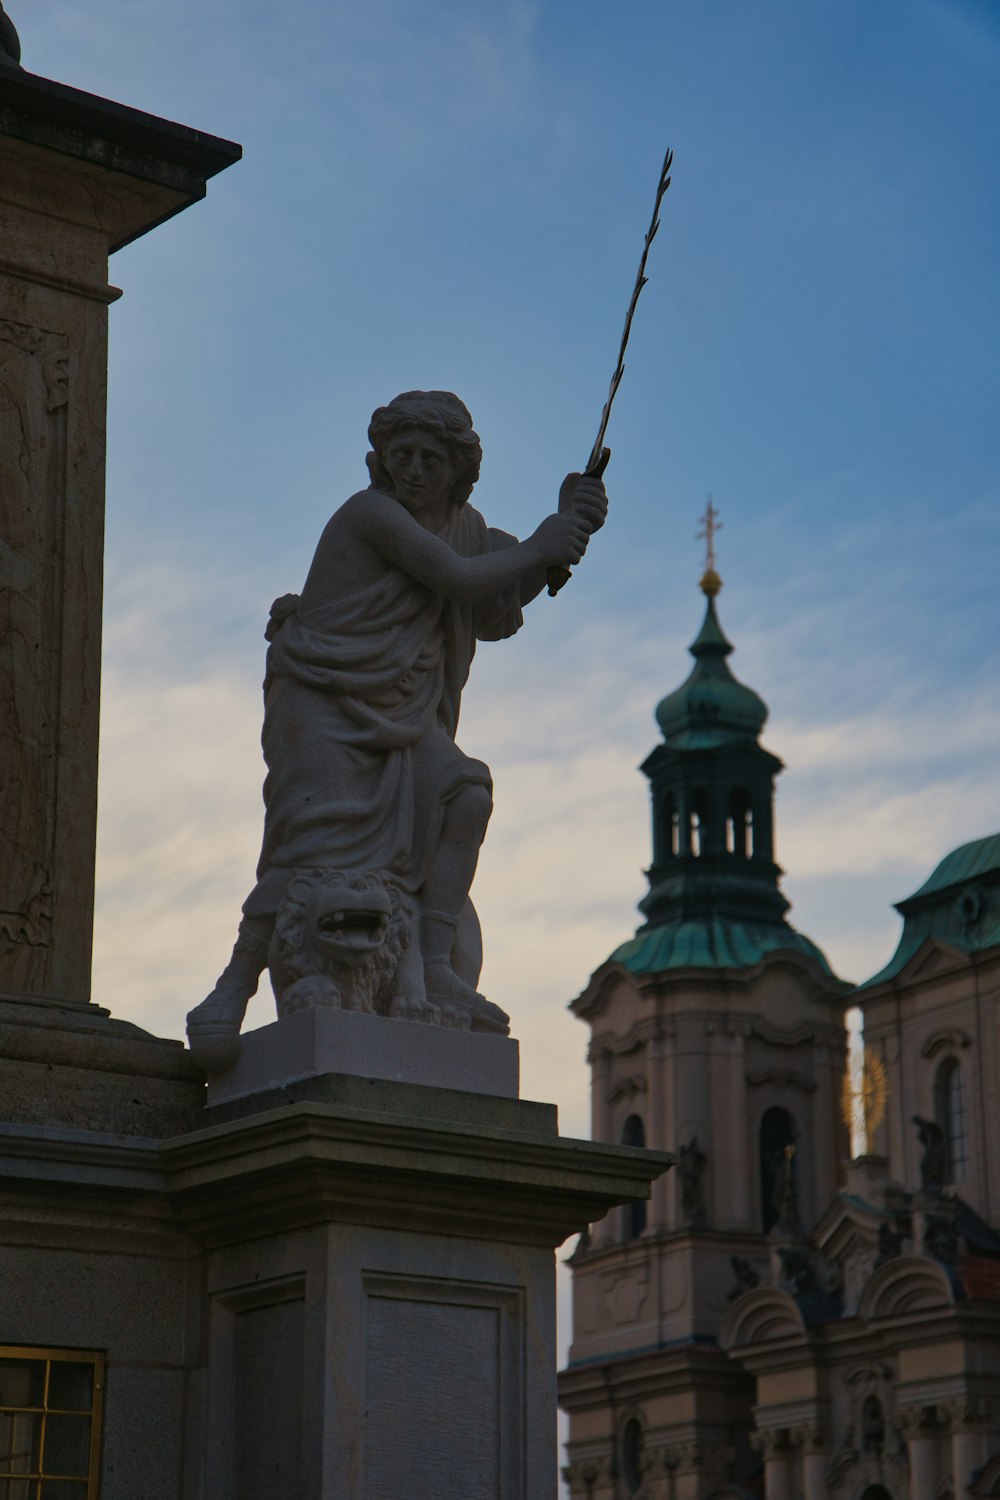 a statue of a man holding a fishing rod